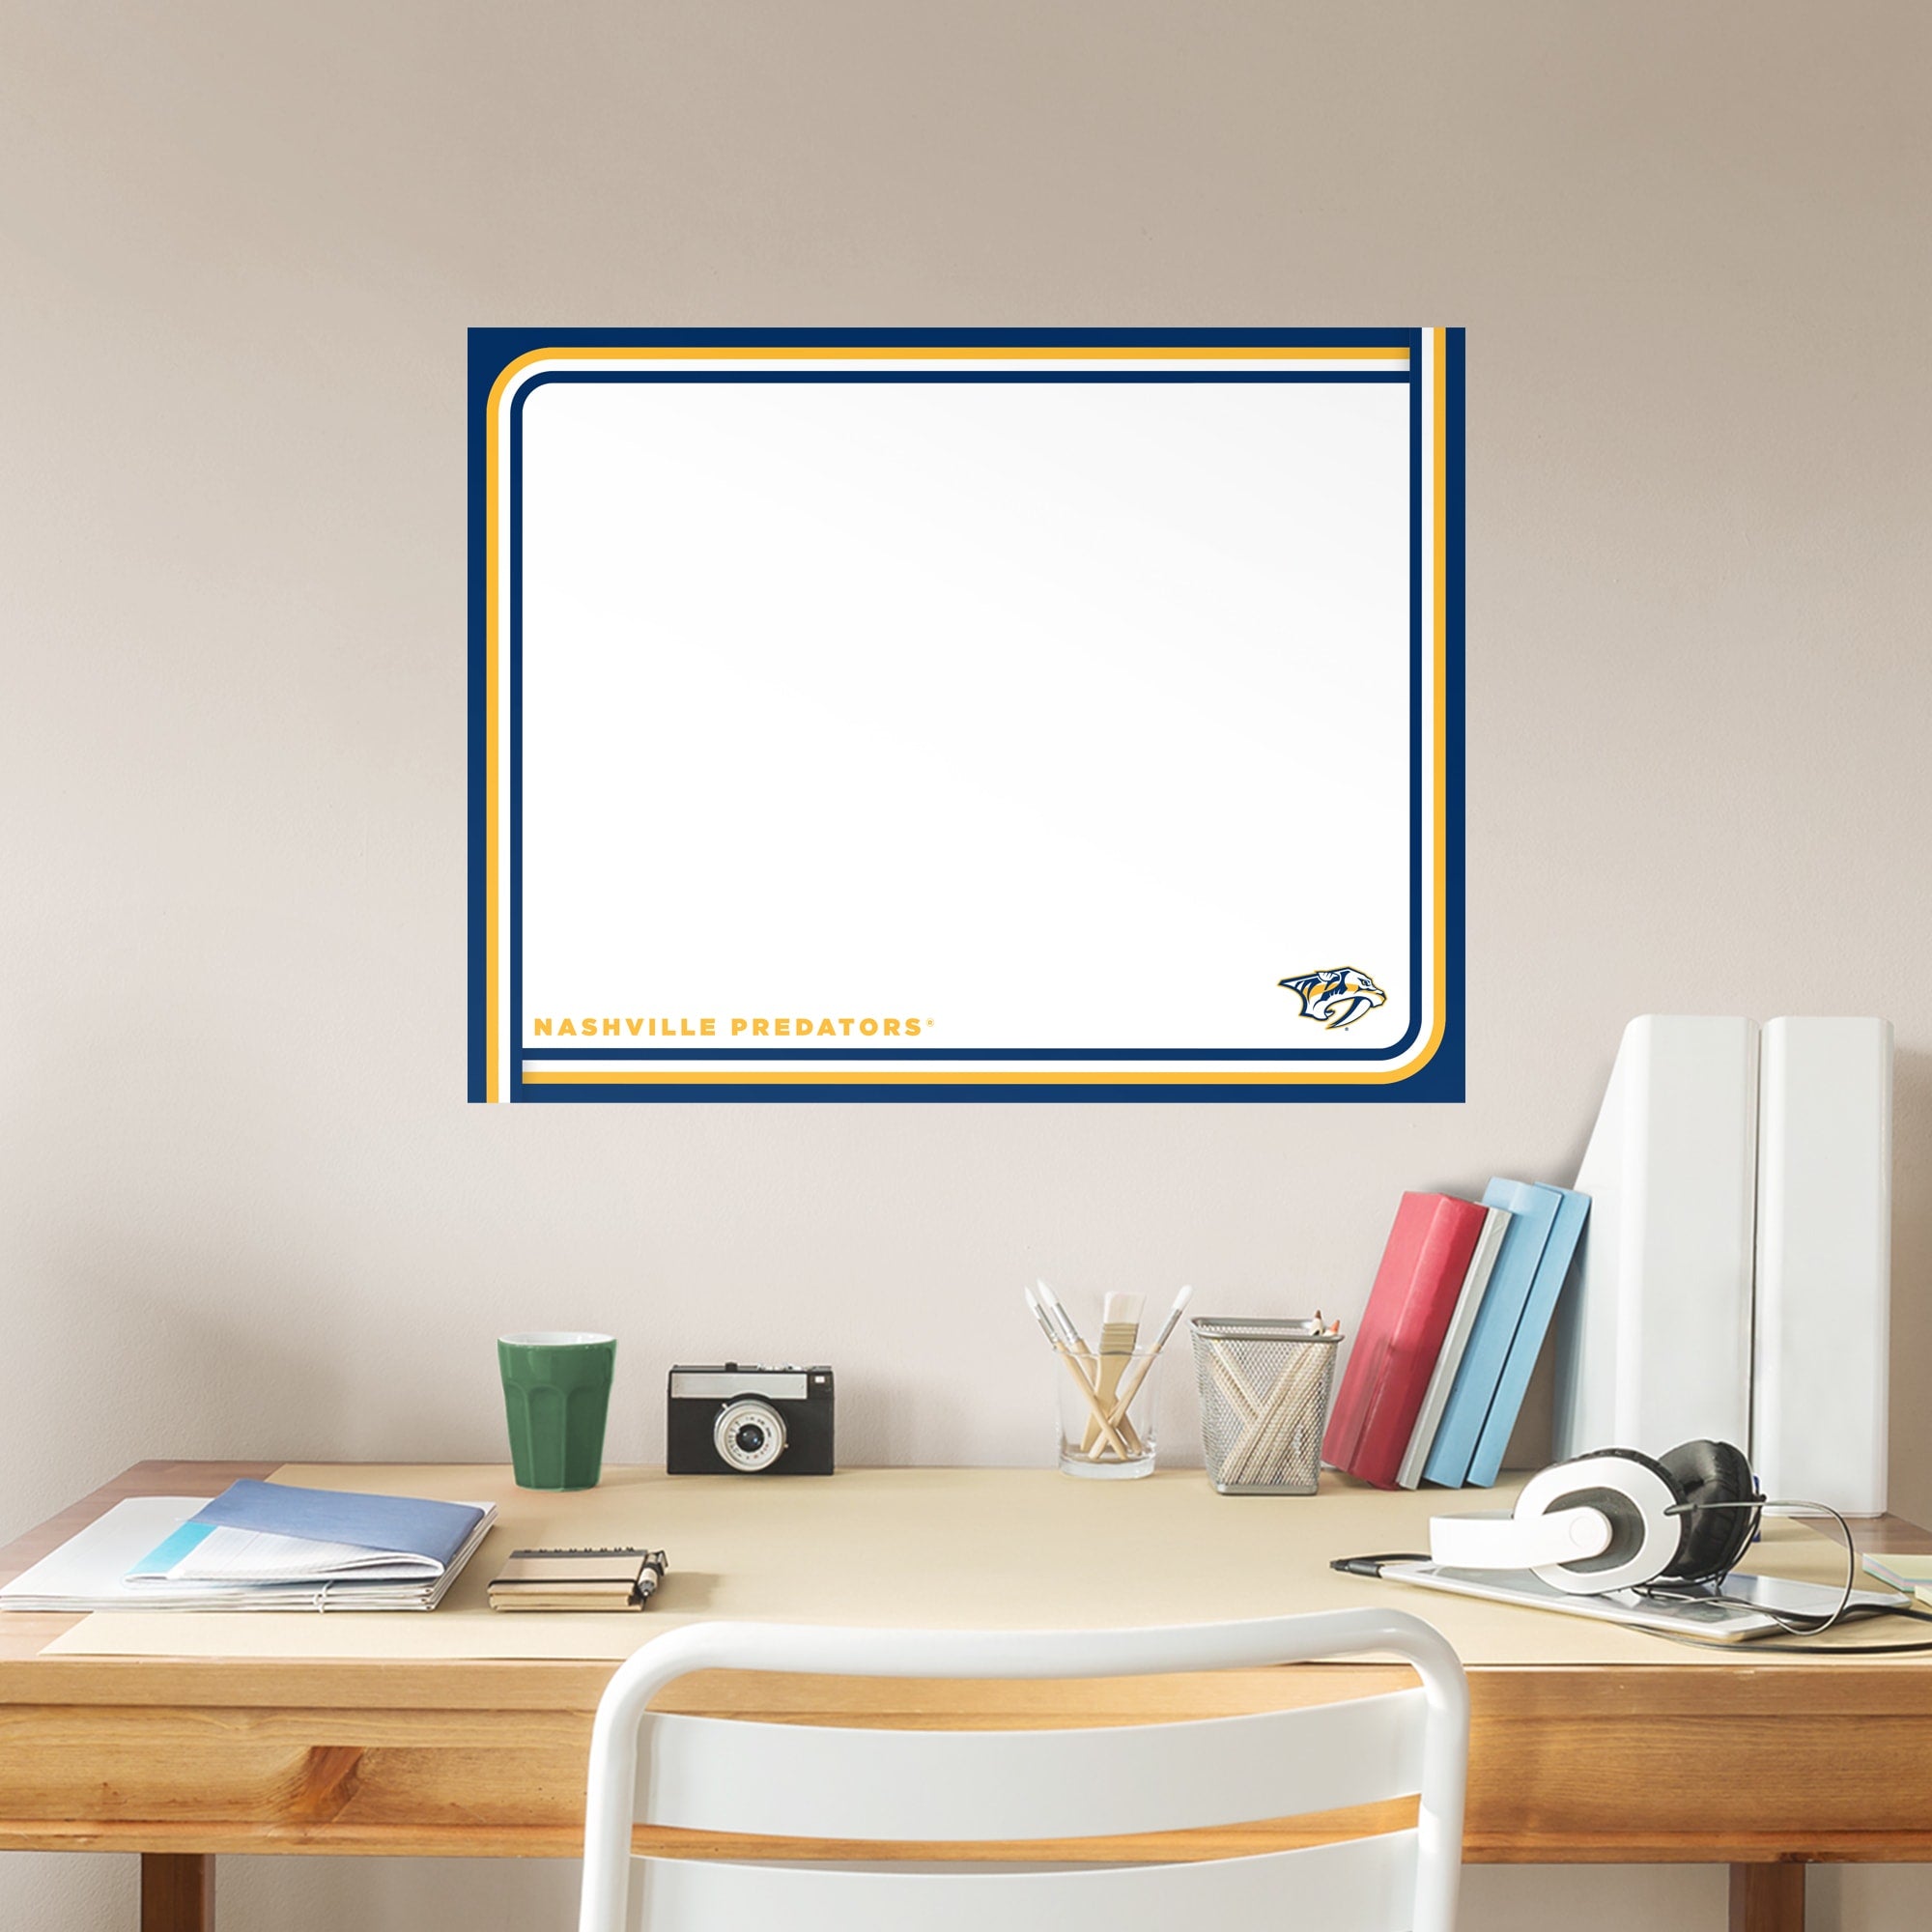 Nashville Predators: Dry Erase Whiteboard - X-Large Officially Licensed NHL Removable Wall Decal XL by Fathead | Vinyl